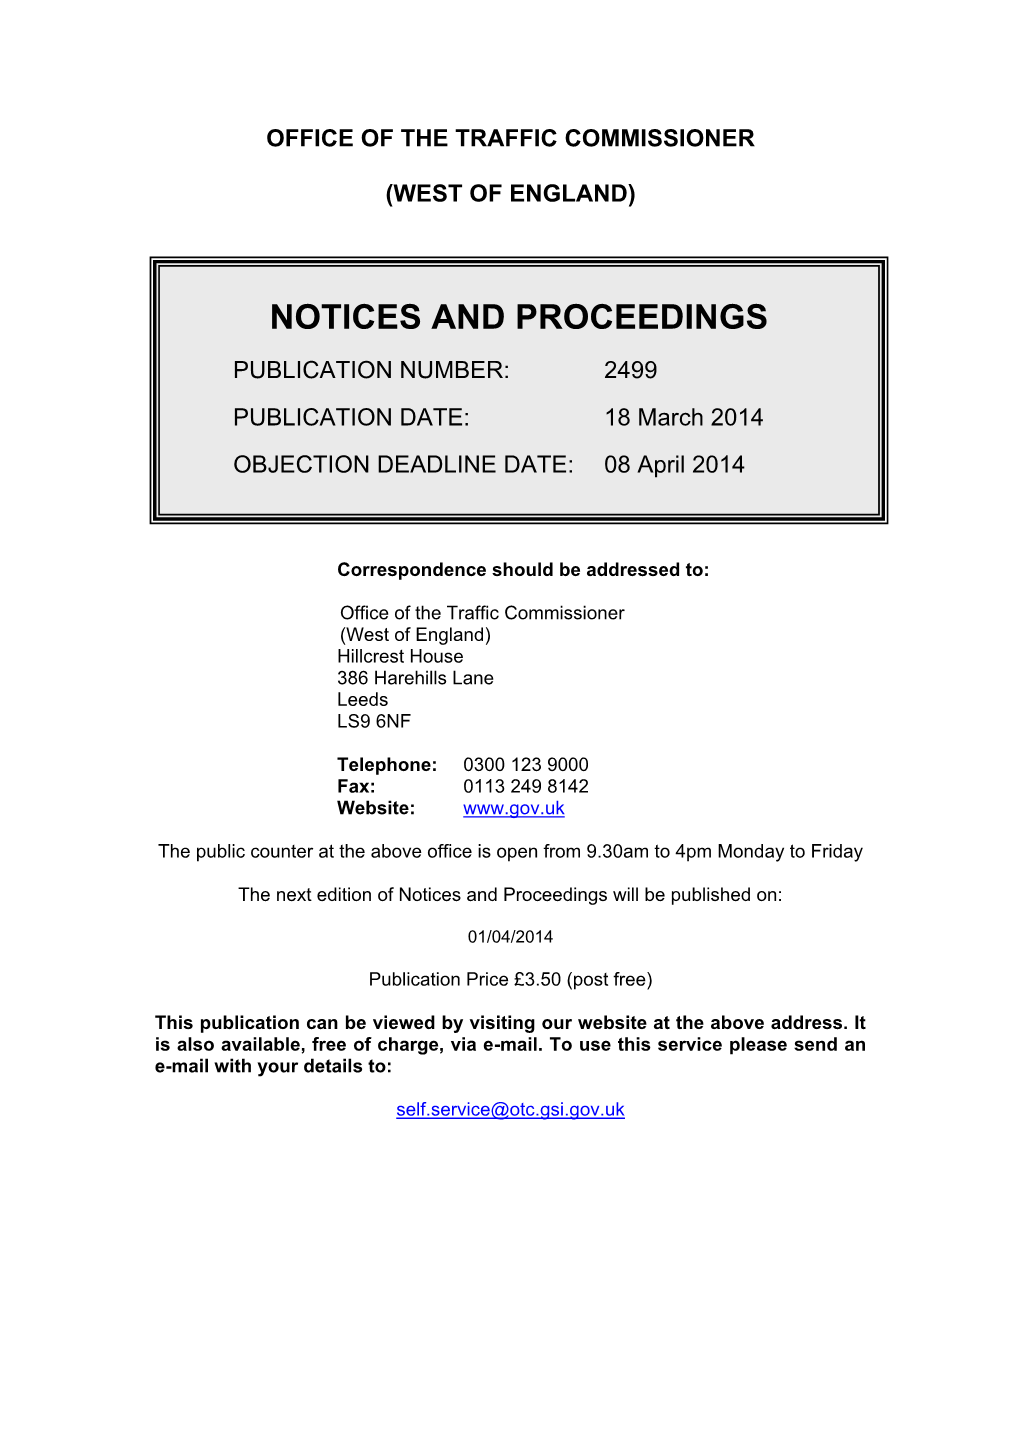 Notices and Proceedings: West of England: 18 March 2014